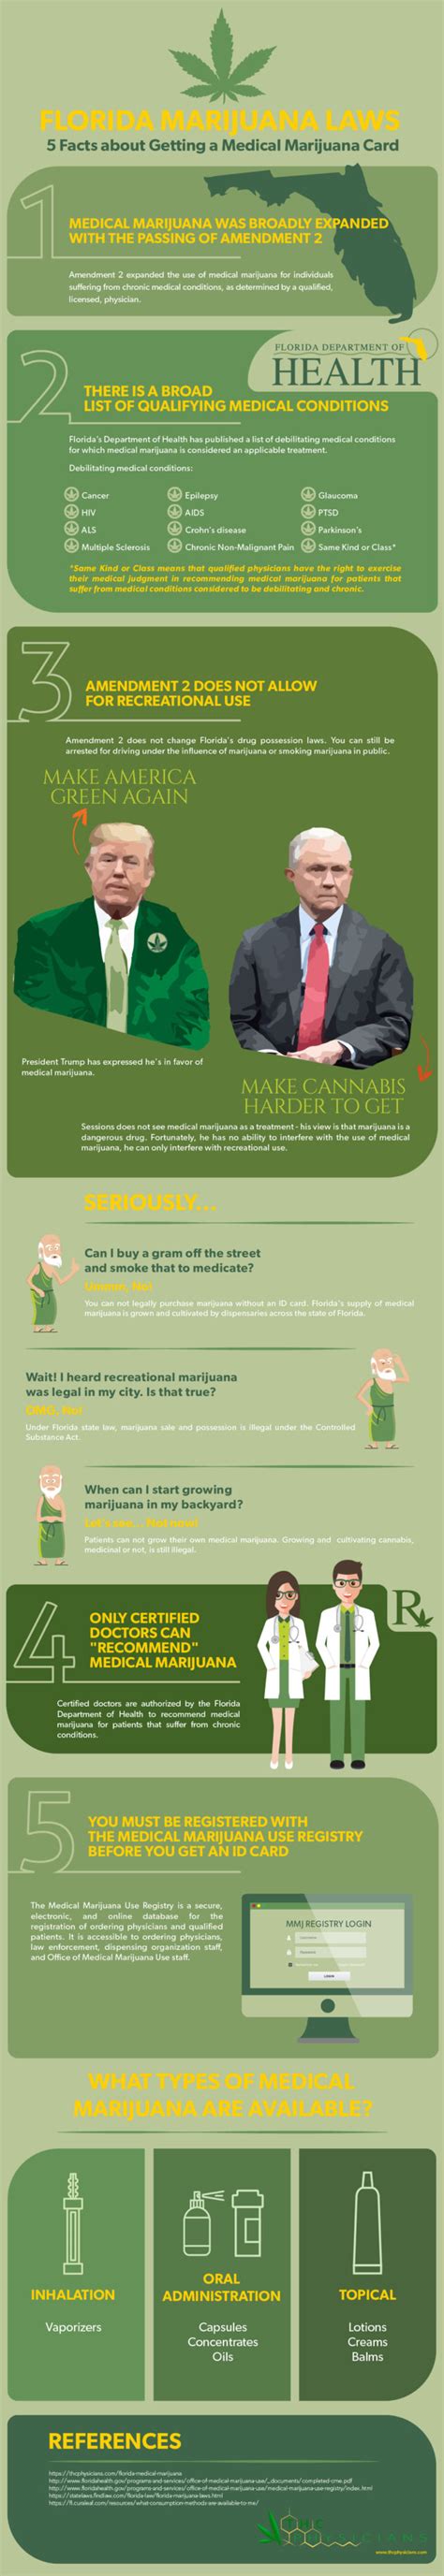 Therefore, opioid use disorder patients are eligible for medicinal marijuana if they suffer from chronic, painful withdrawal symptoms or as an adjunct treatment. Who Qualifies for a Medical Marijuana Card: 5 Key Facts - Infographic